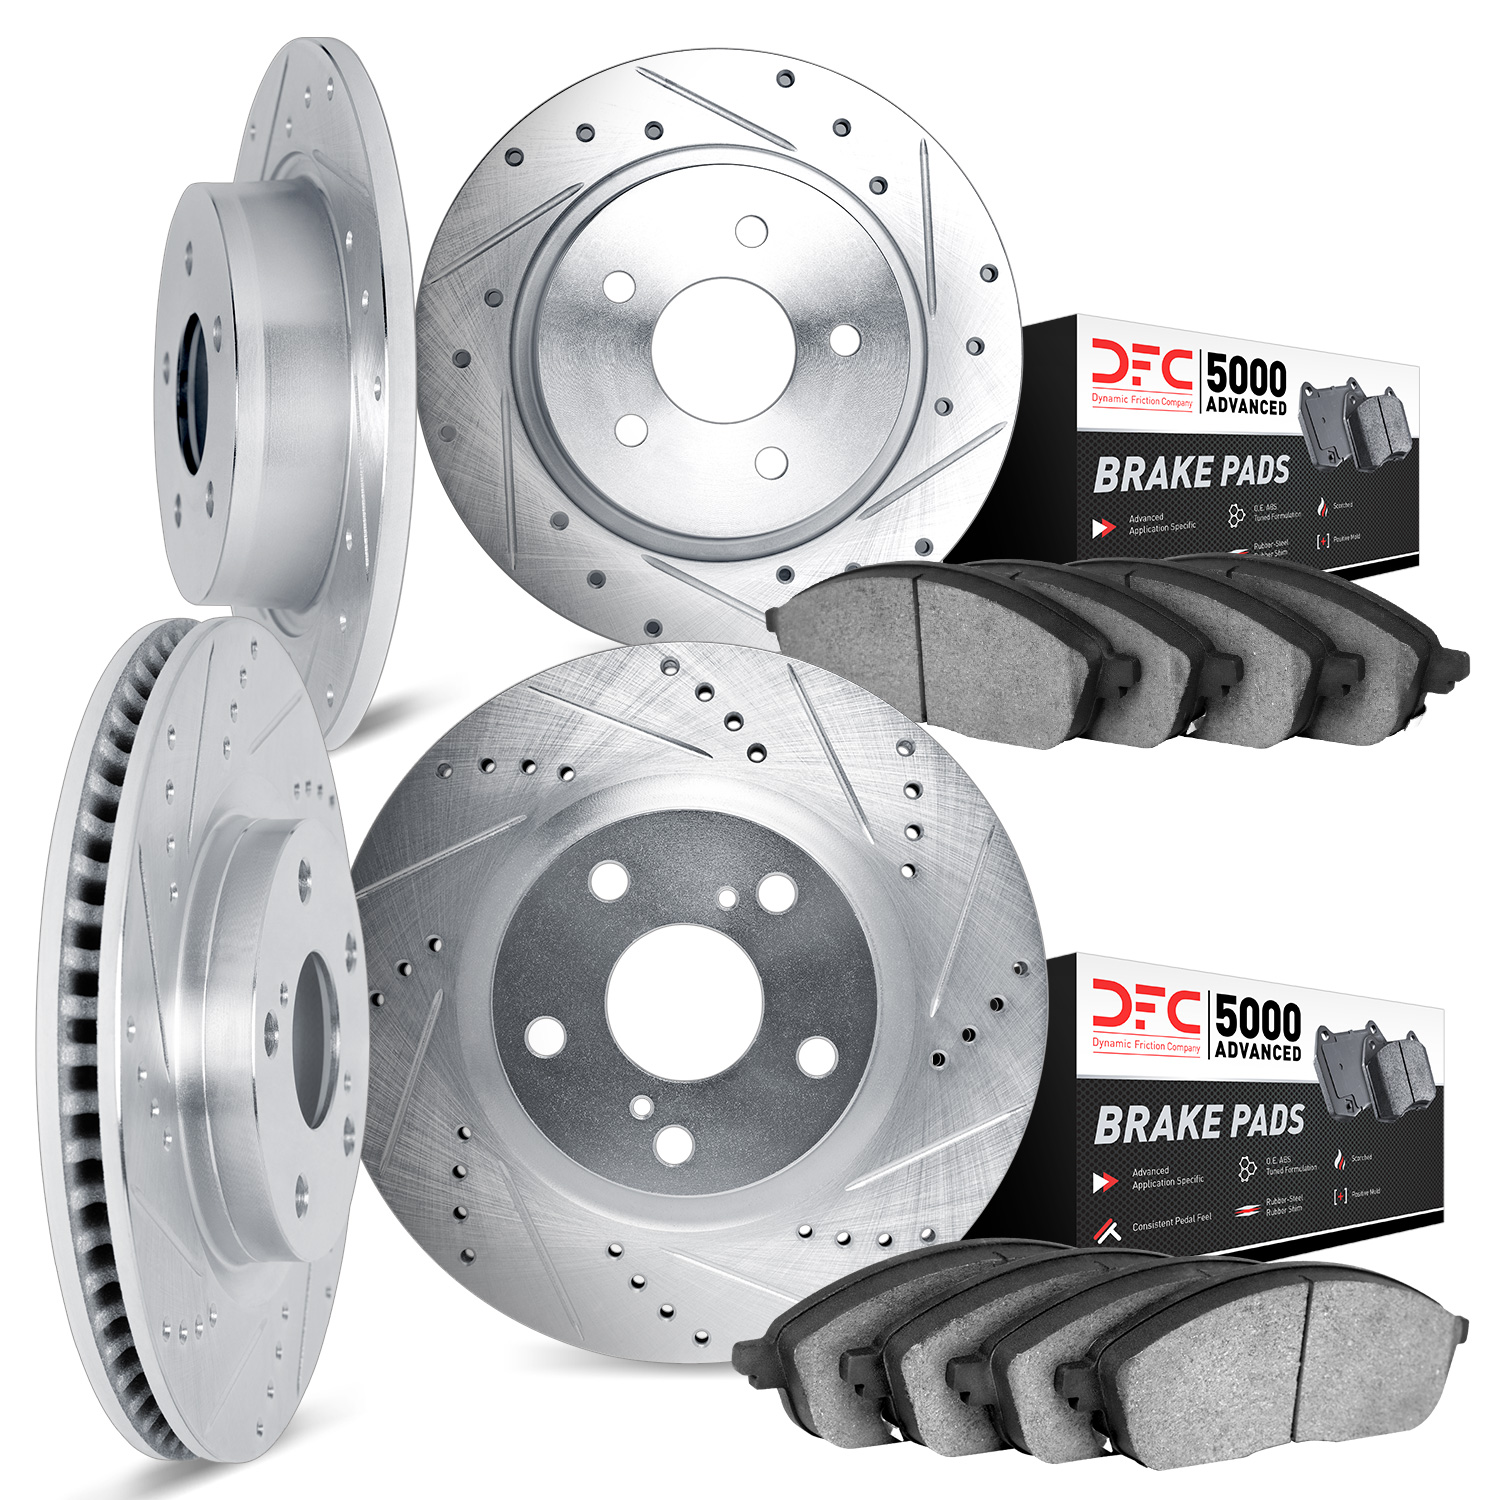 7504-20005 Drilled/Slotted Brake Rotors w/5000 Advanced Brake Pads Kit [Silver], 2003-2005 Jaguar, Position: Front and Rear